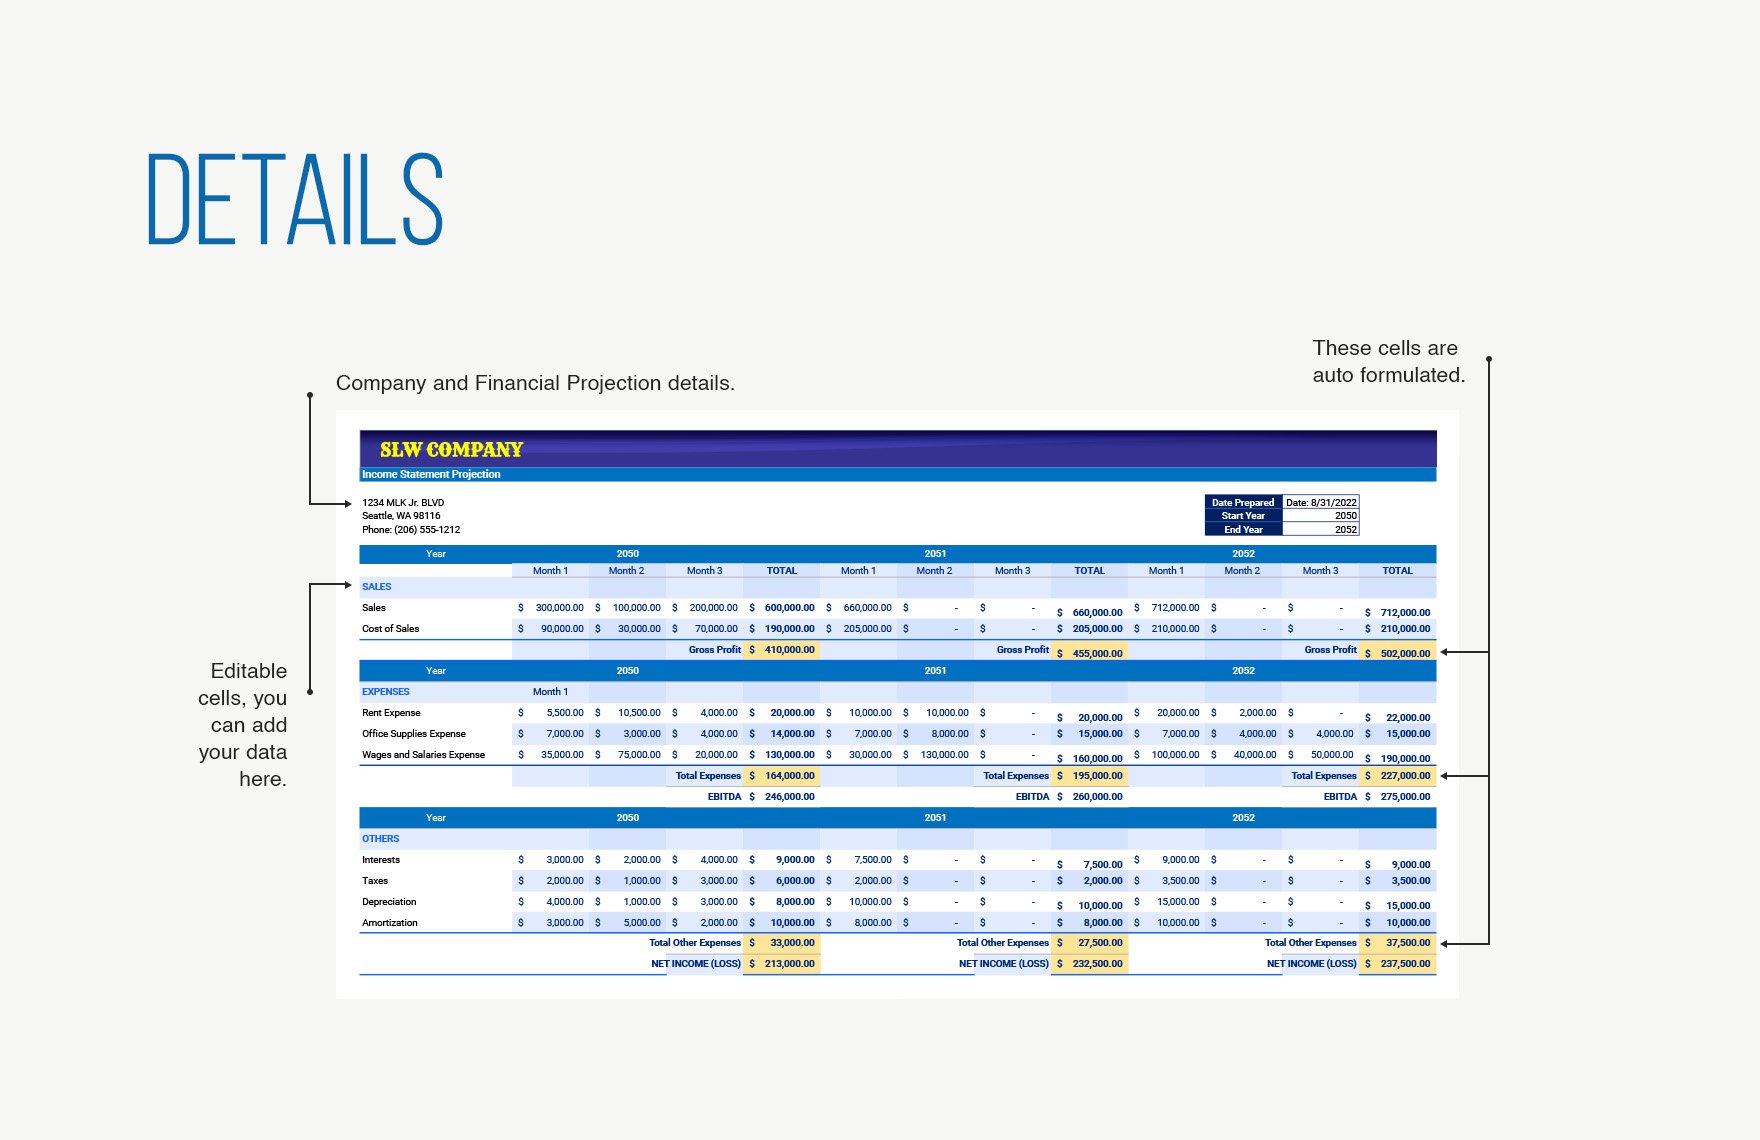 Business Financial Projection Template